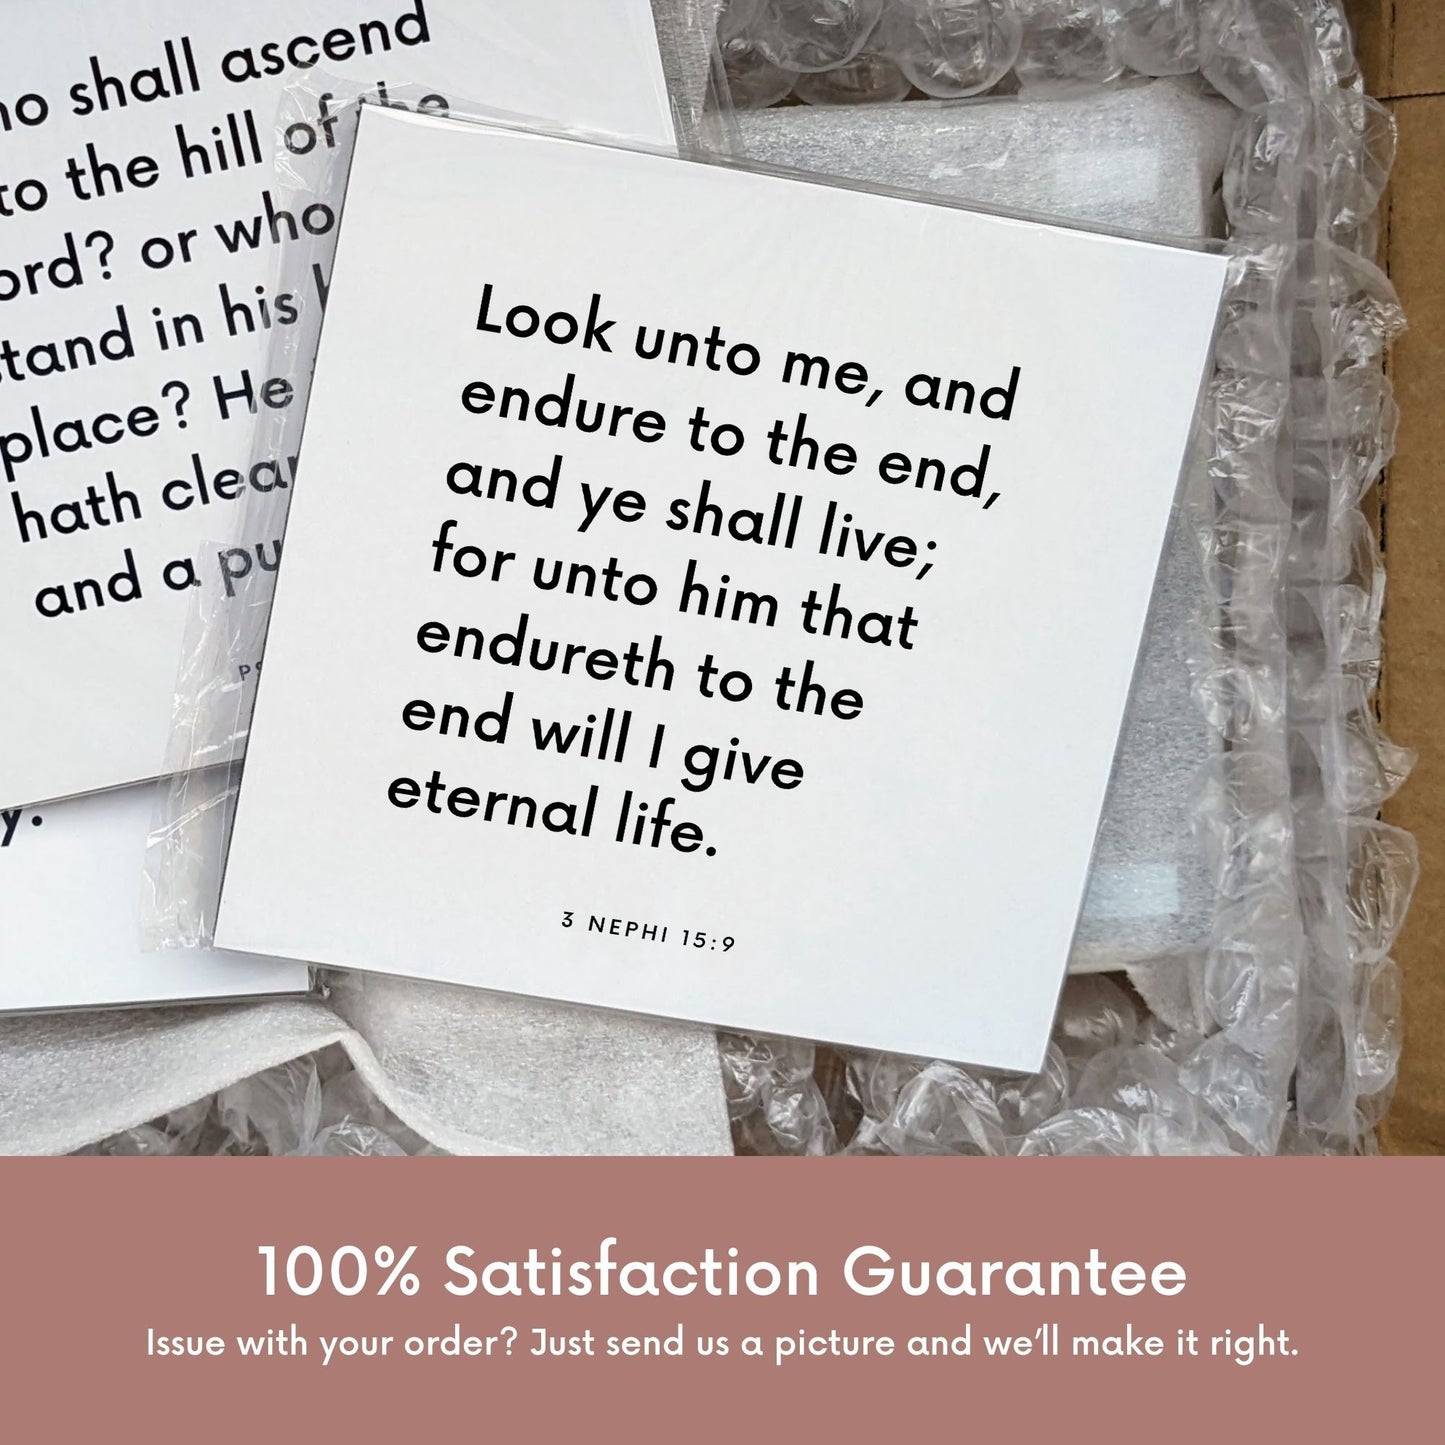 Shipping materials for scripture tile of 3 Nephi 15:9 - "Look unto me, and endure to the end, and ye shall live"